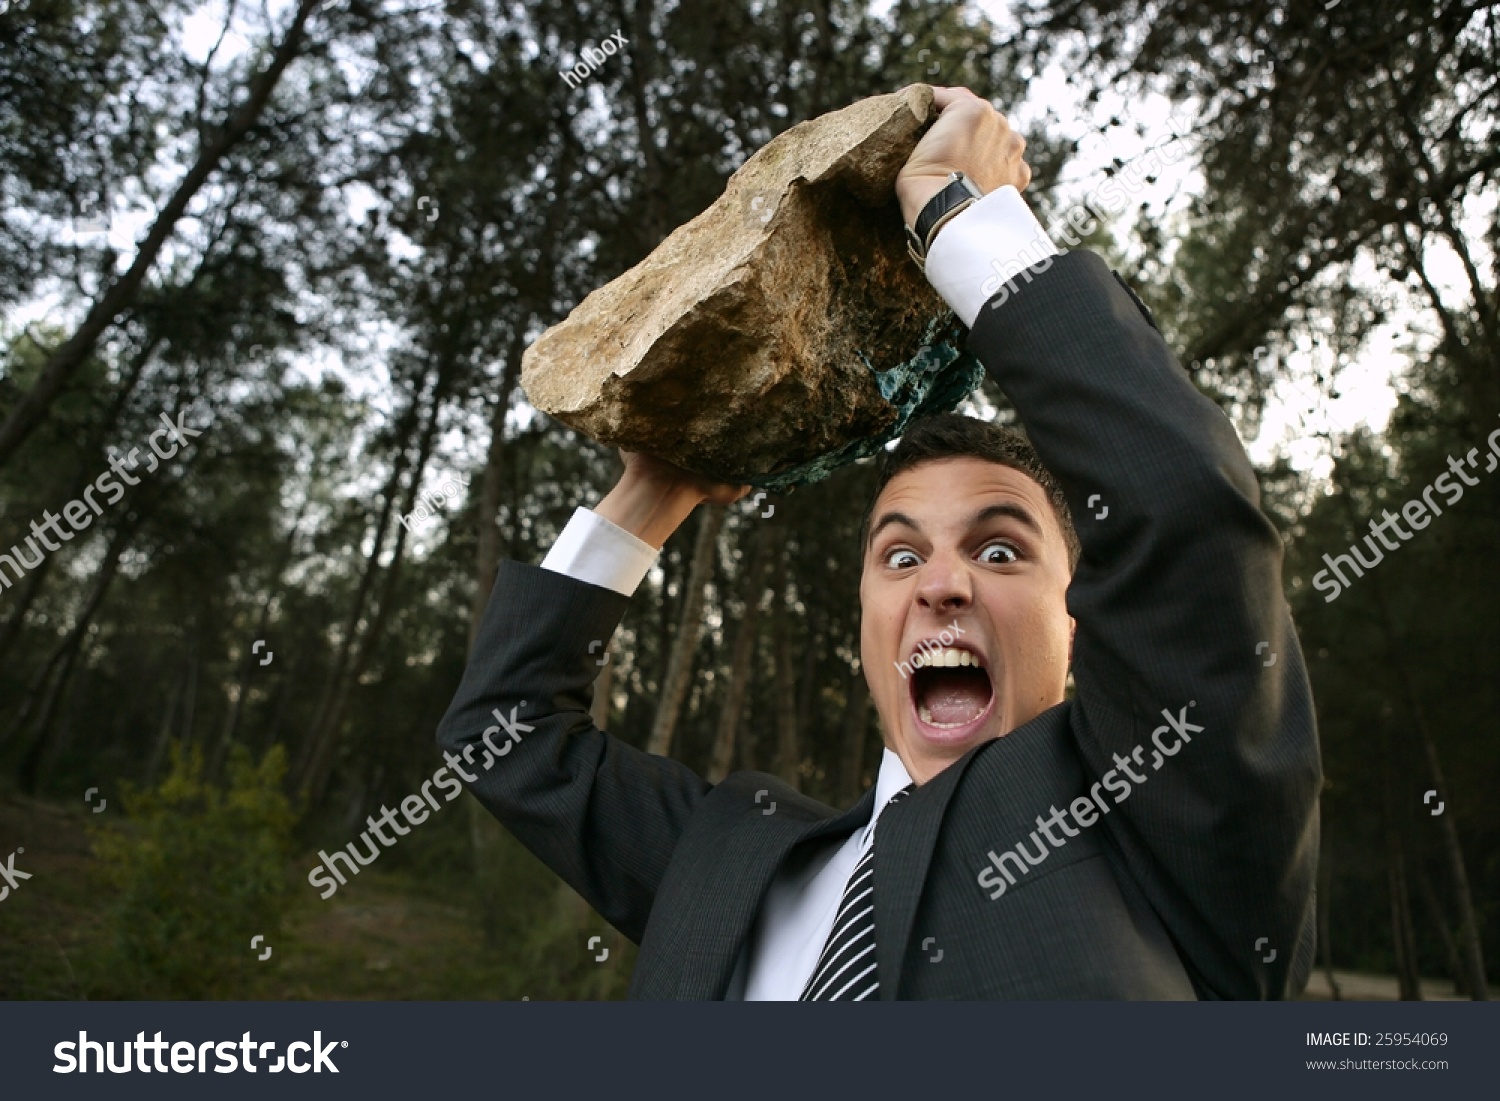 stock-photo-angry-businessman-in-outdoor-forest-big-stone-in-hands-25954069.jpg